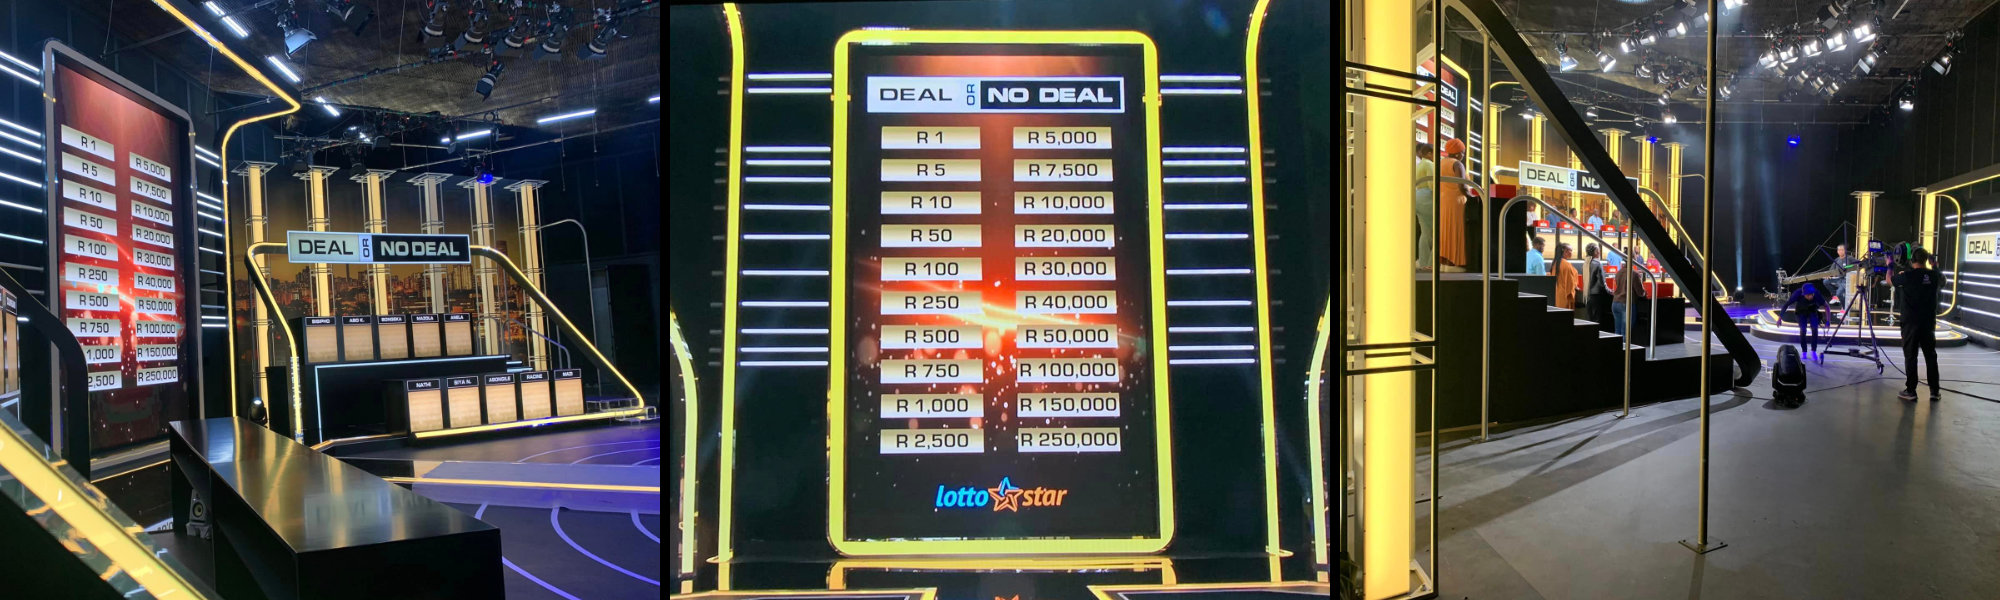 Deal or no Deal South Africa